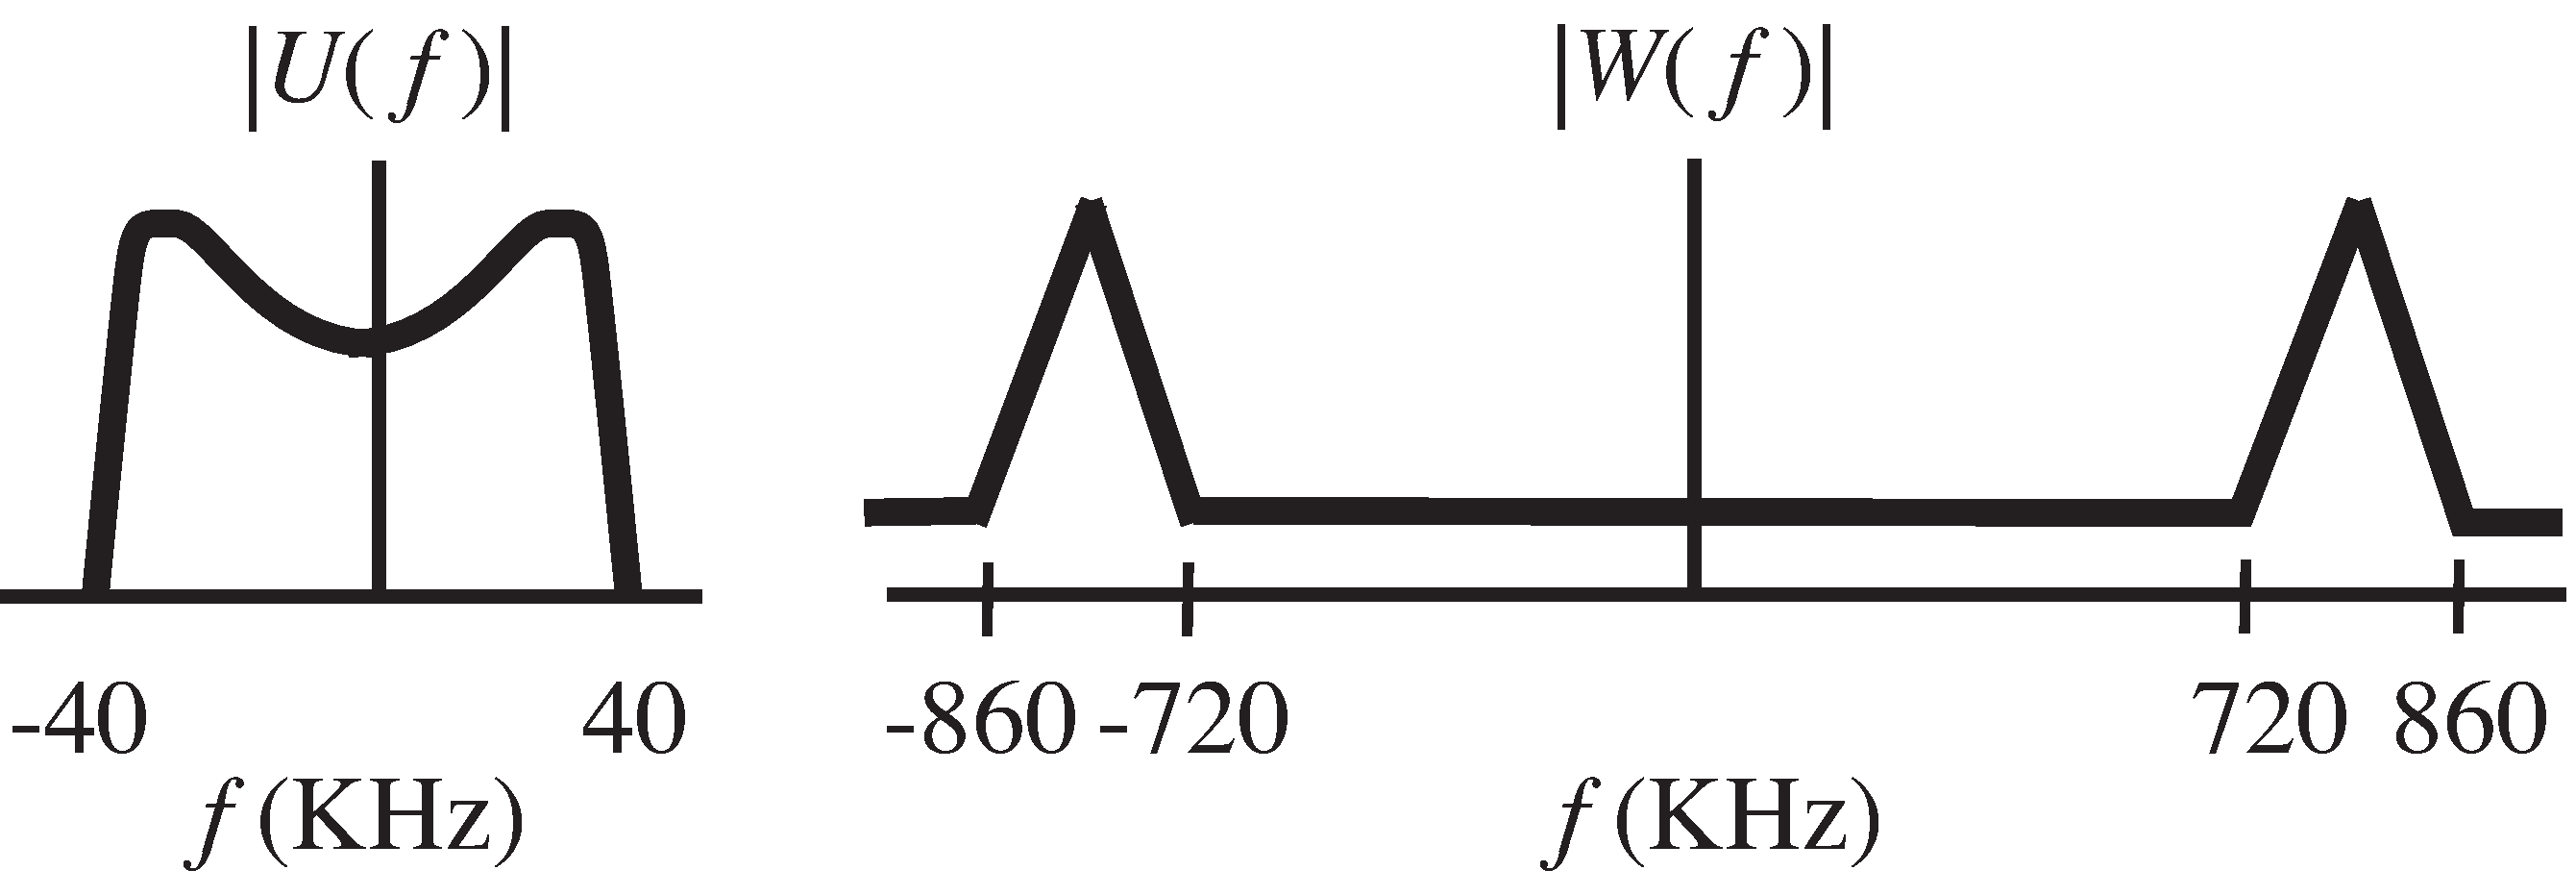 Magnitude spectra of the message and interference signals considered in Exercise 6-12.